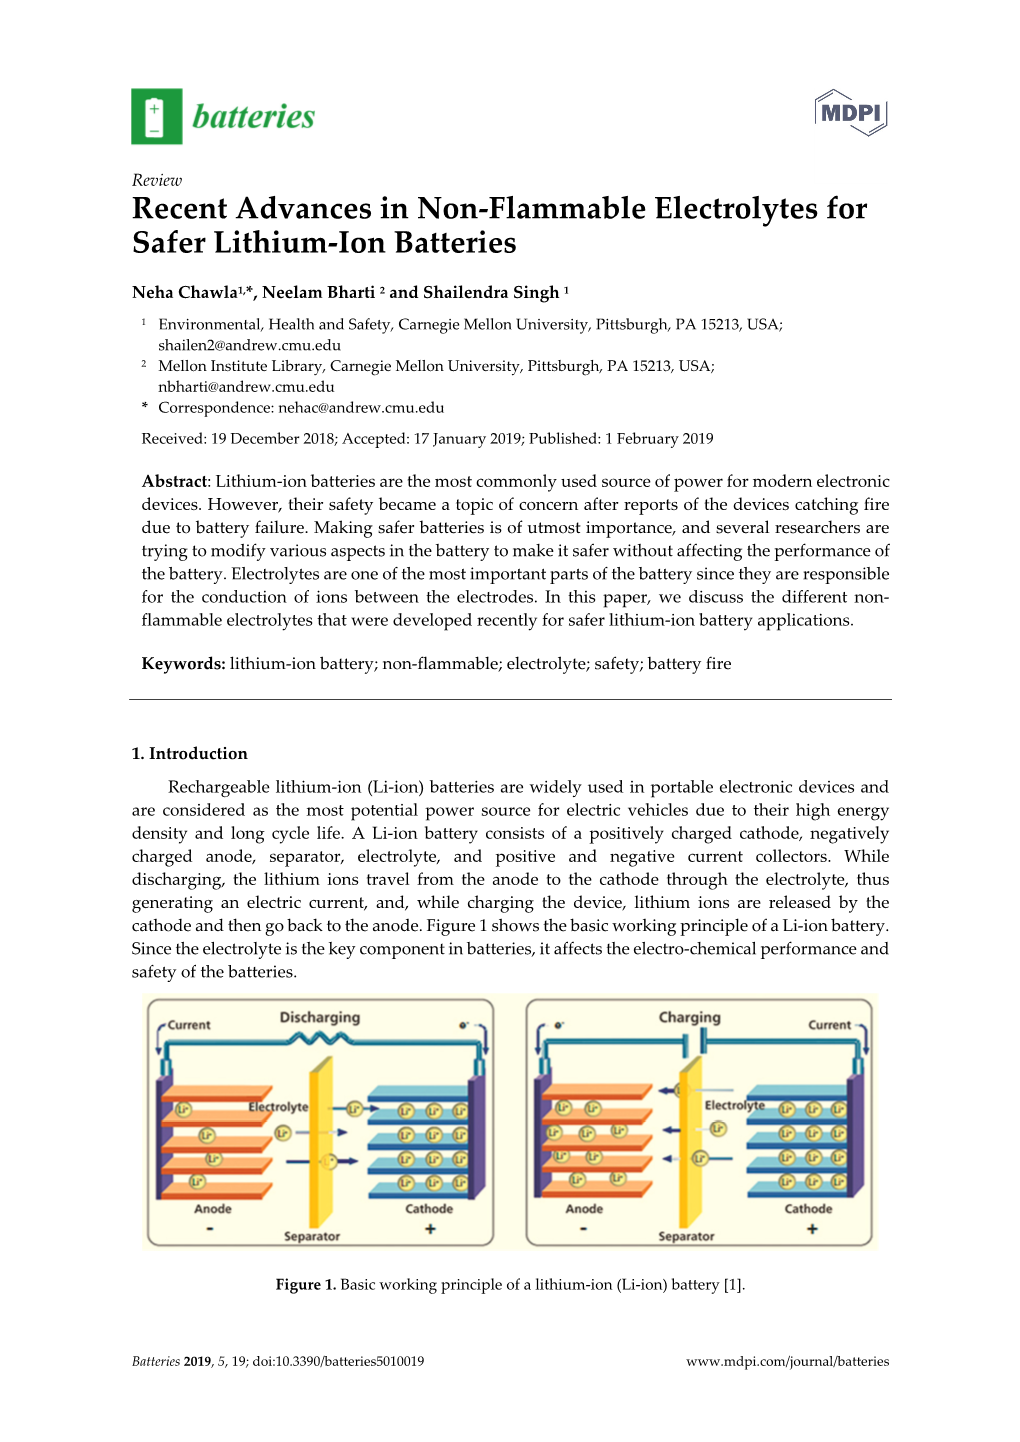 Recent Advances in Non-Flammable Electrolytes for Safer Lithium-Ion Batteries